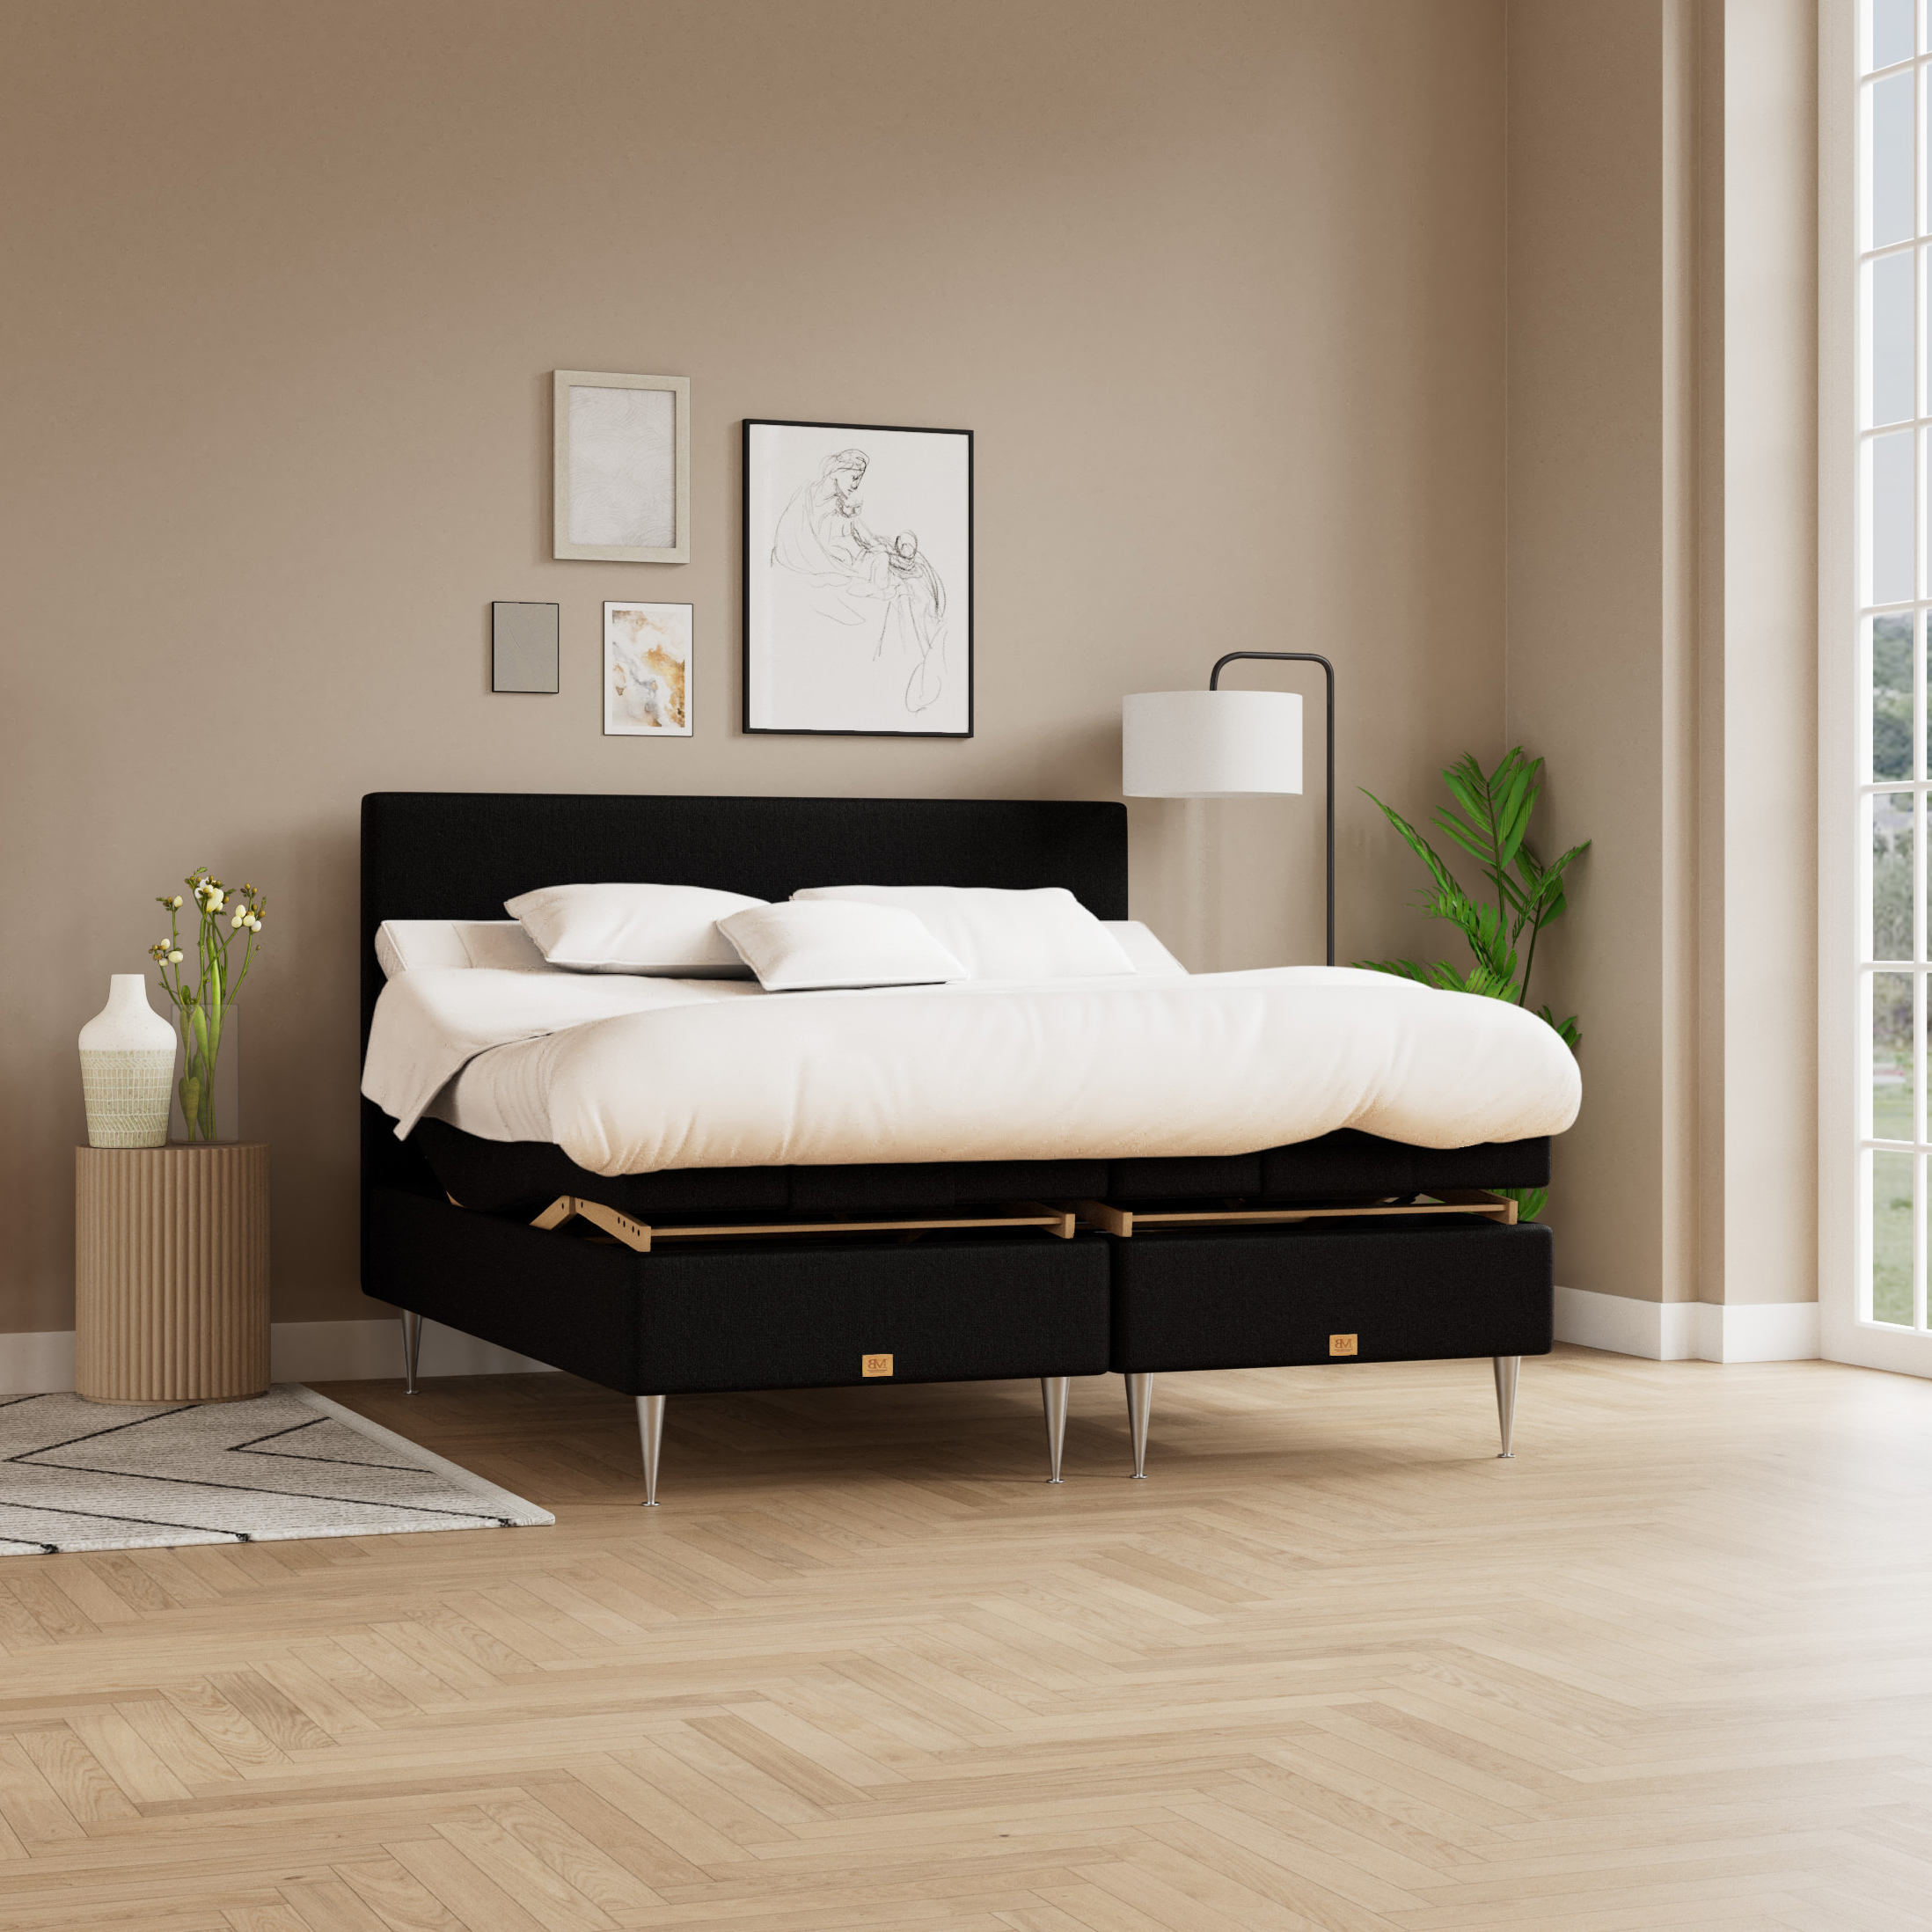 MasterBed Select Elora - Elevation - 210x210